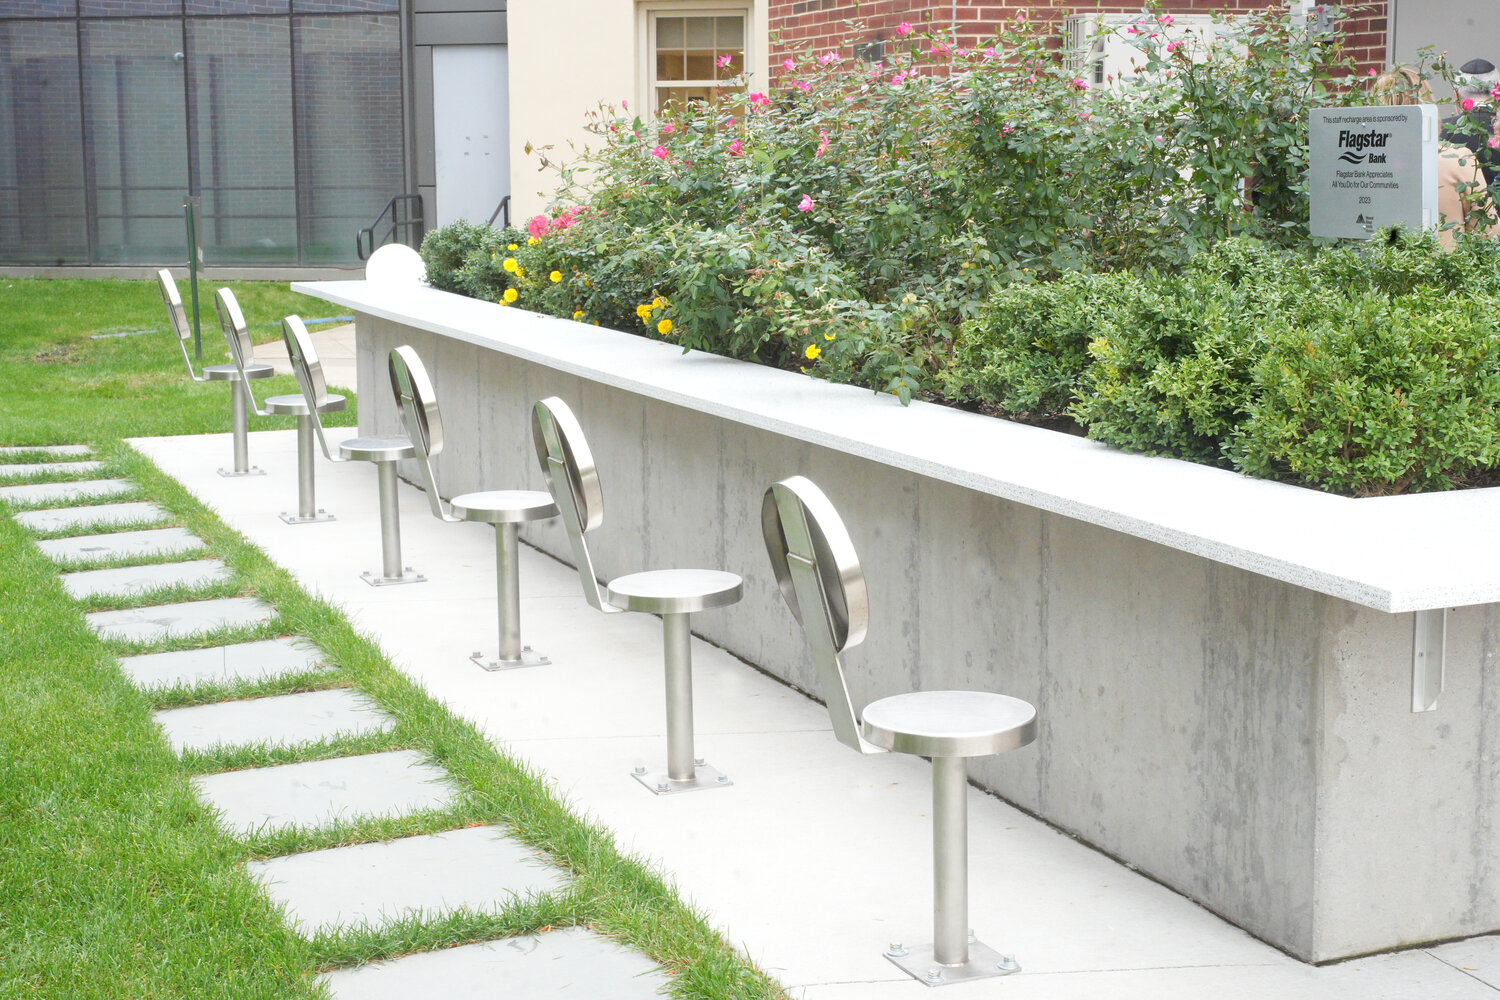 The new employee recharge area gives hospitals employees the chance to take a break and enjoy the fresh air.